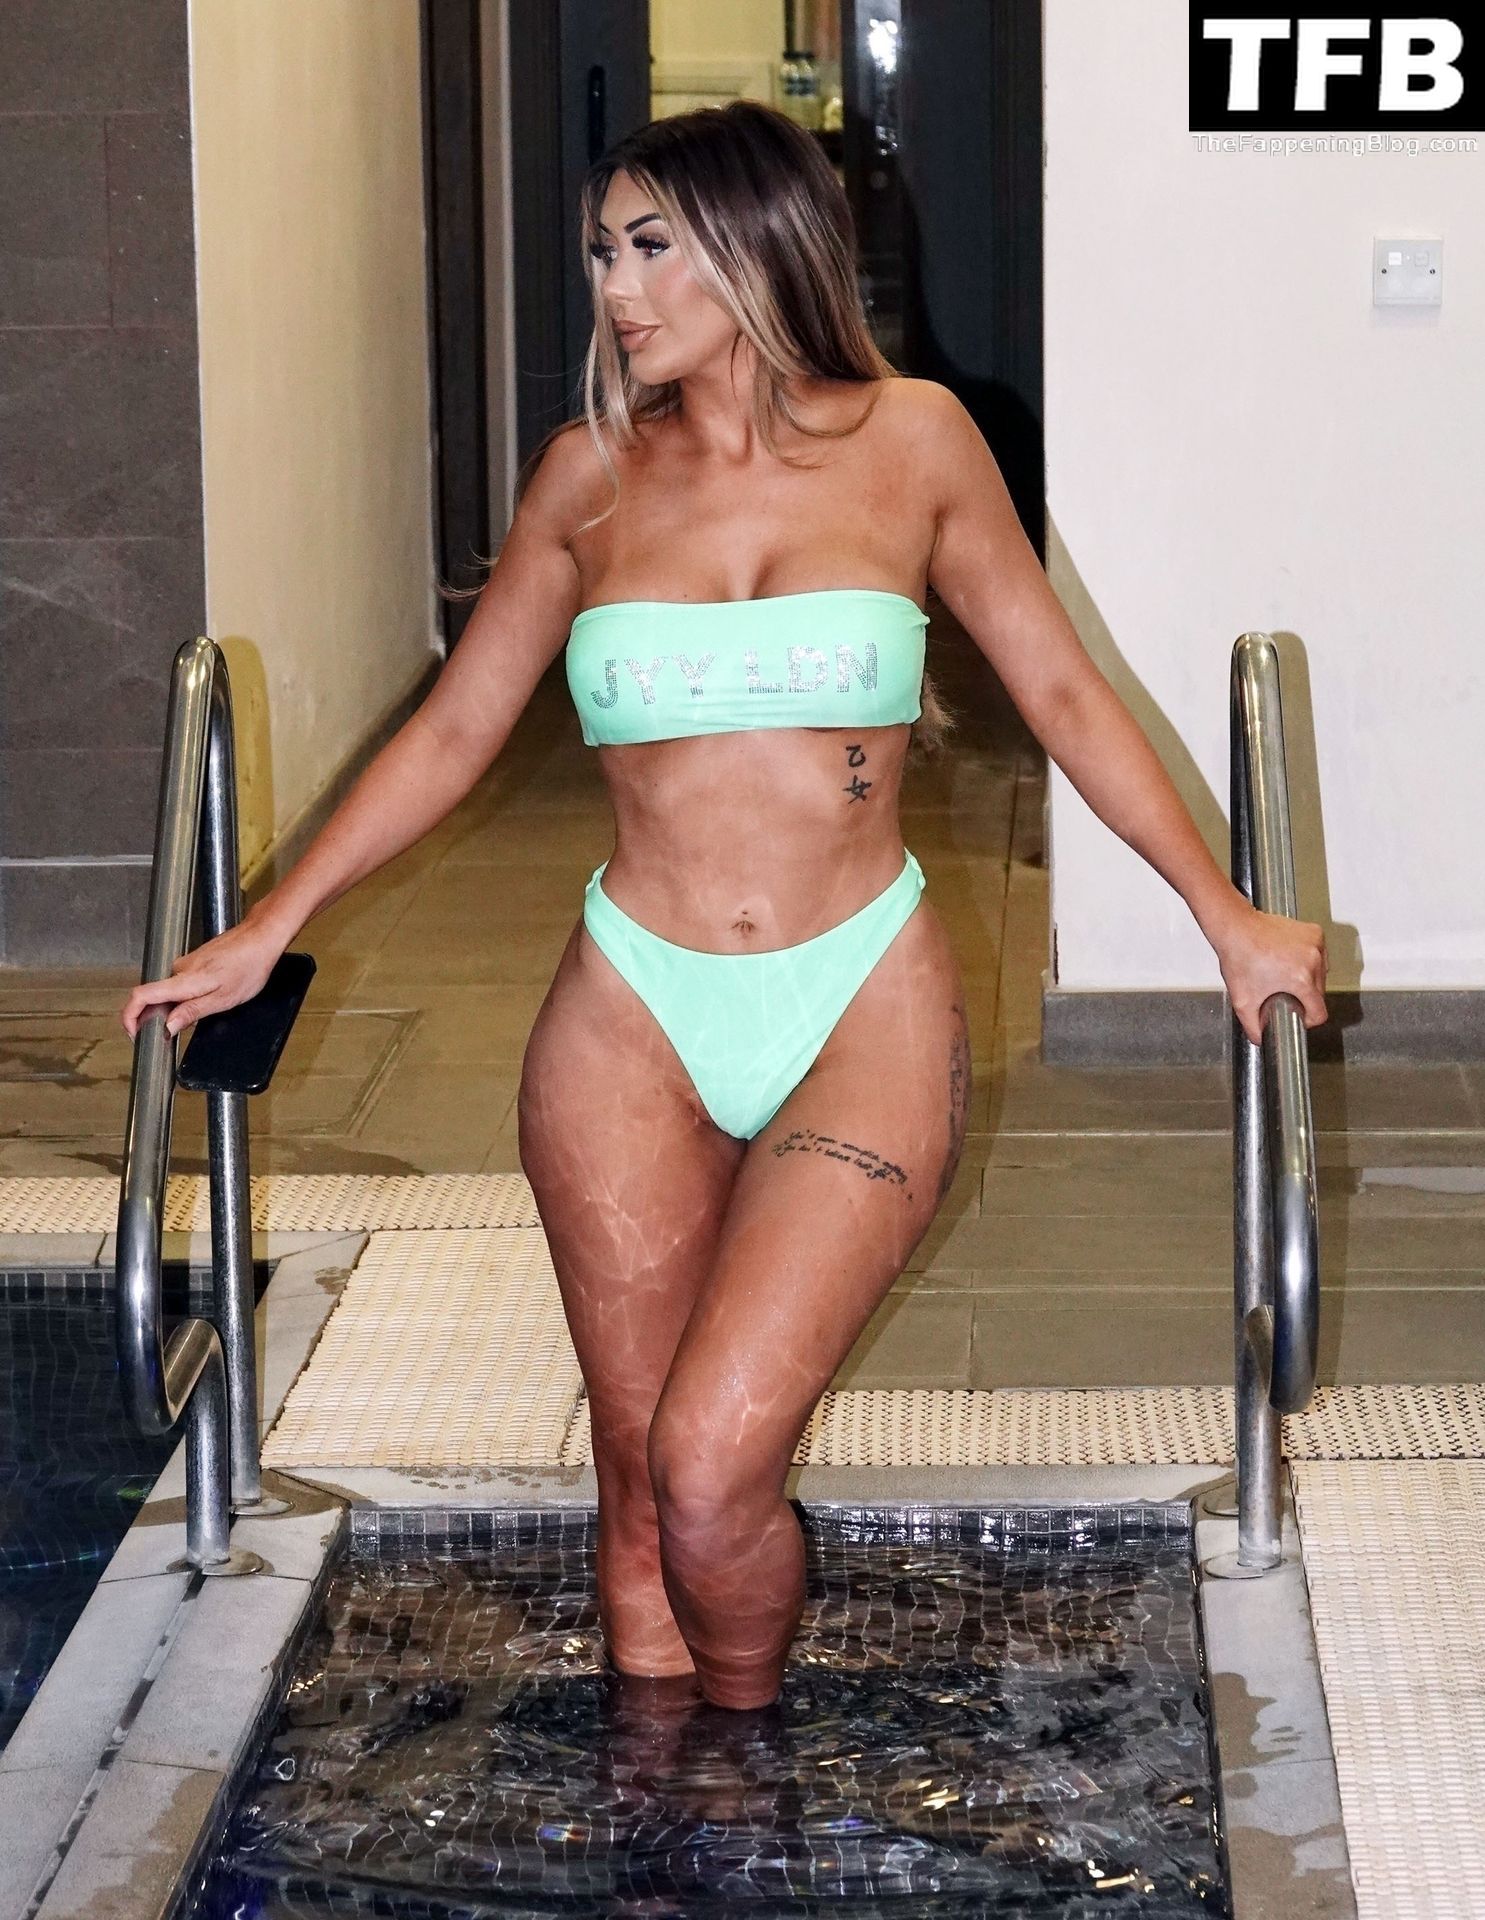 Chloe Ferry Shows Off Her Voluptuous Figure Poolside During a Hot and Steamy Shoot (17 Photos)